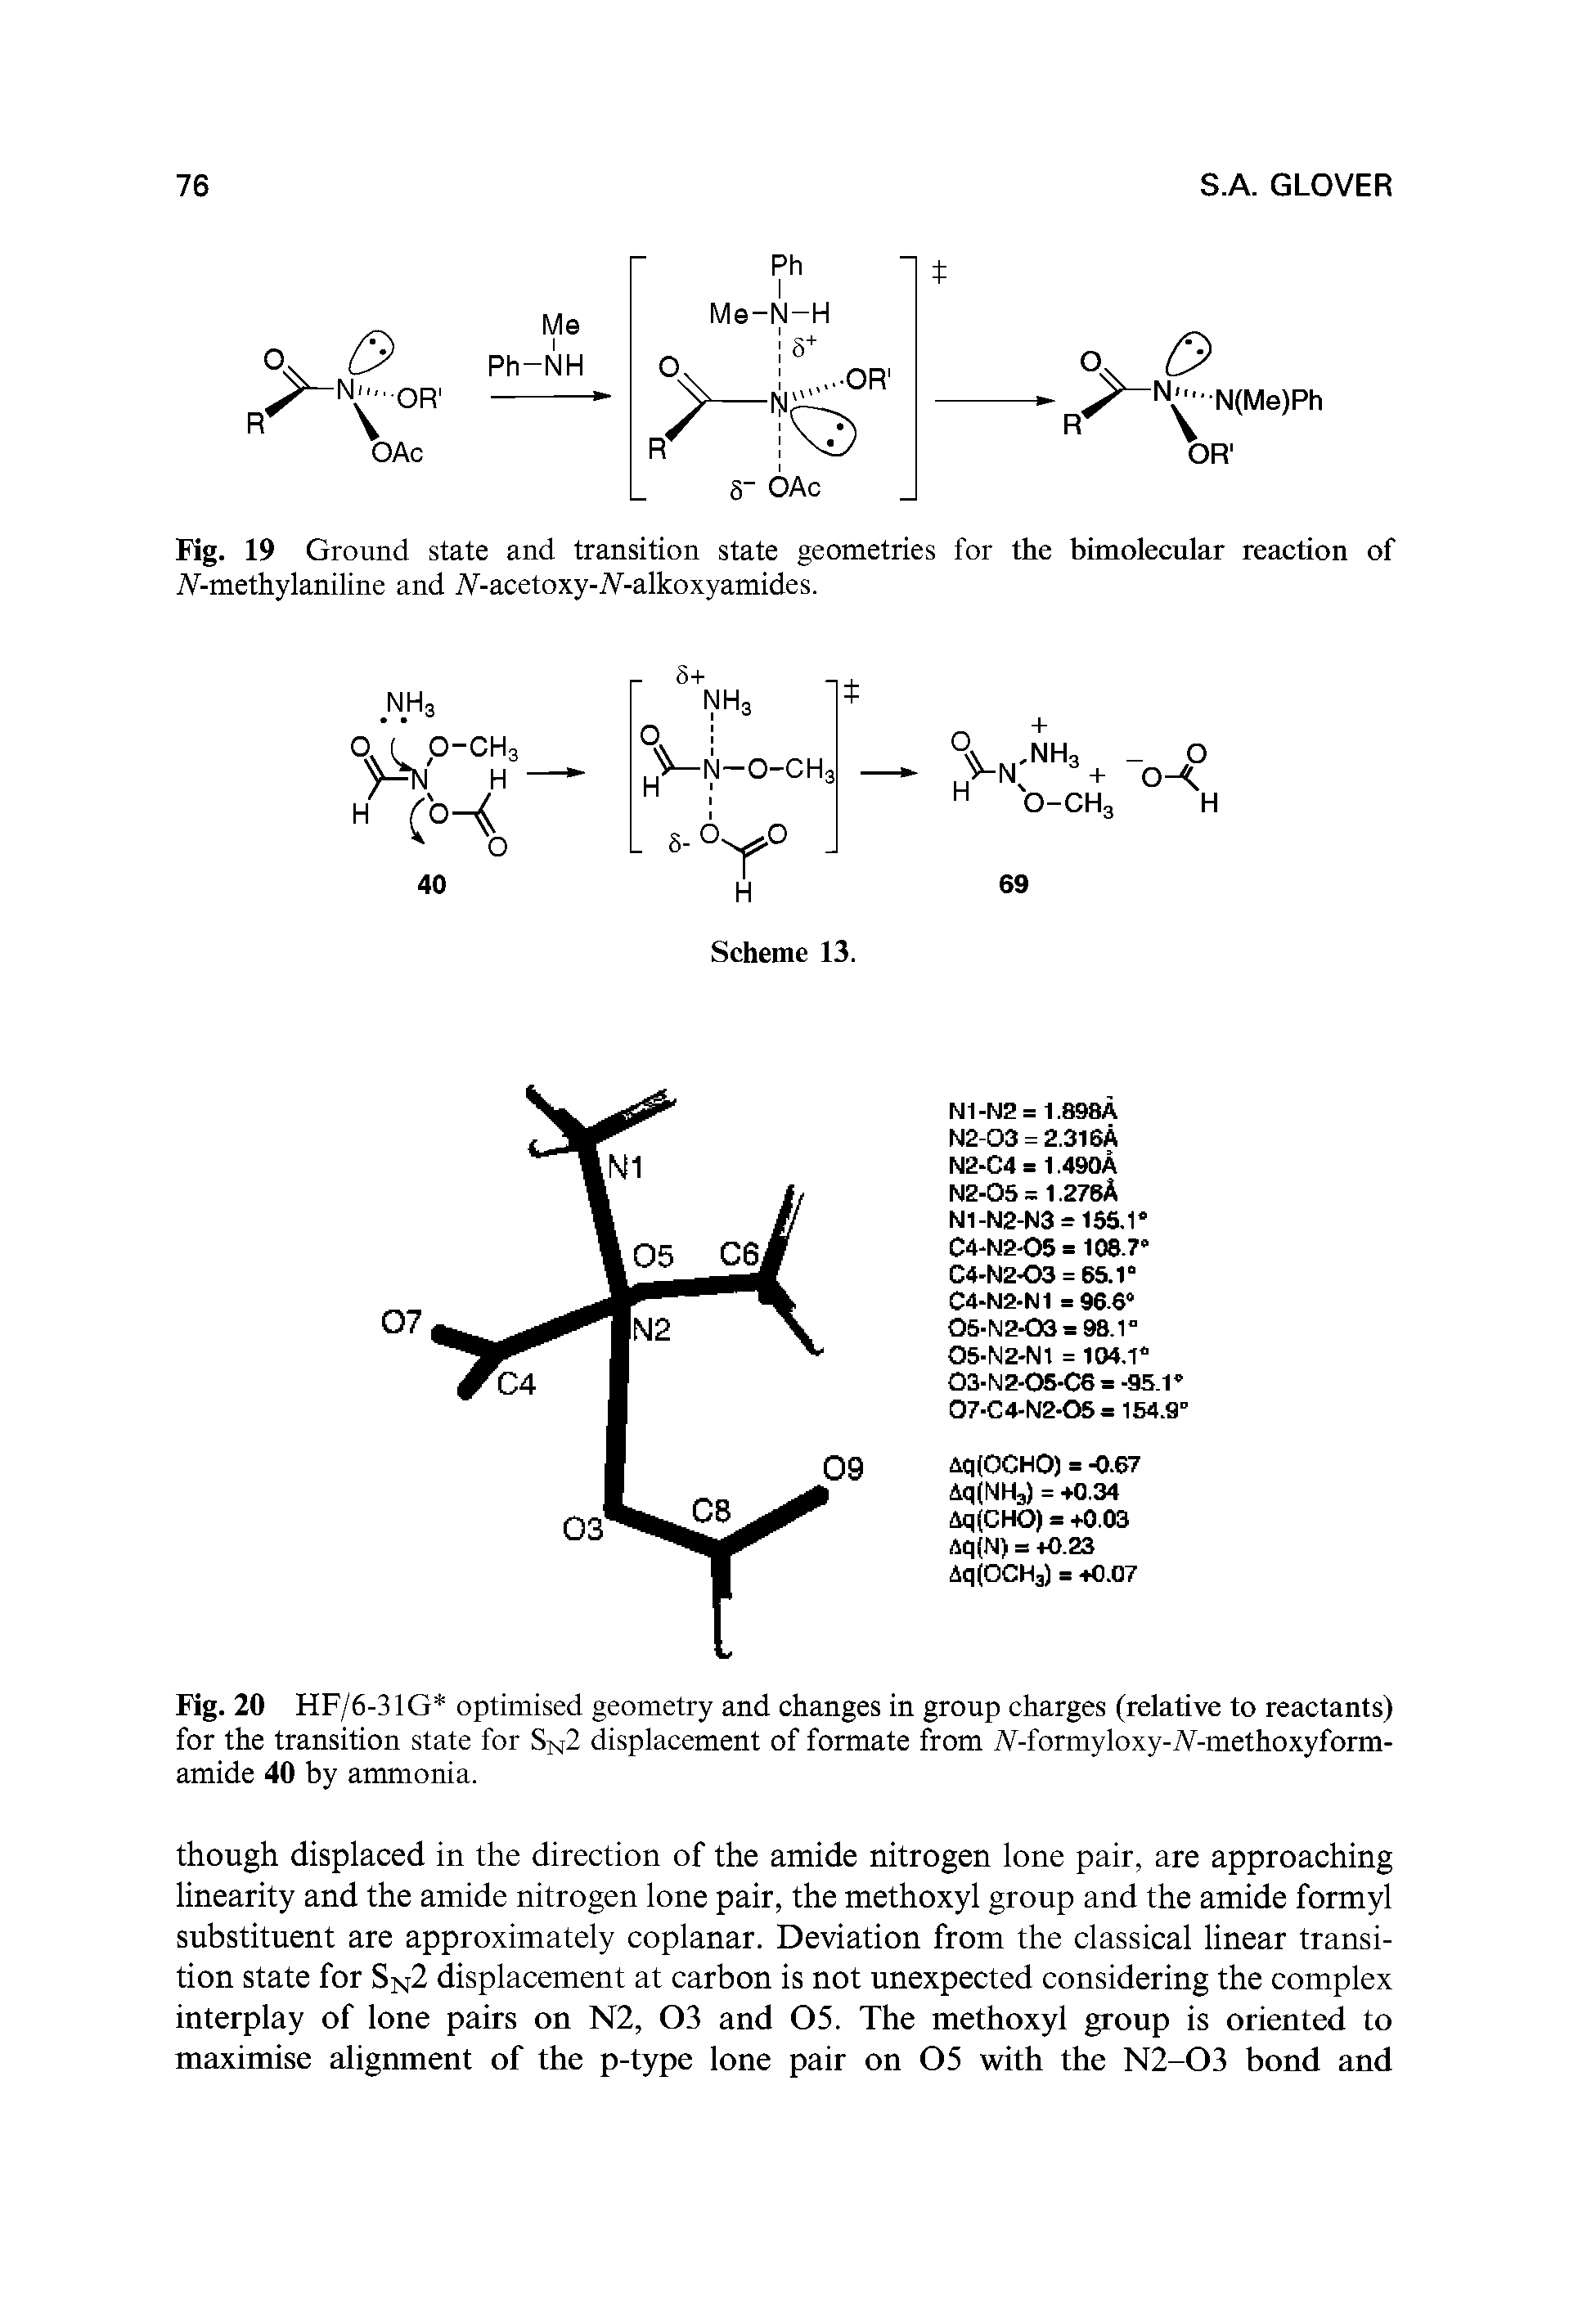 Fig. 19 Ground state and transition state geometries for the bimolecular reaction of Af-methylaniline and A -acetoxy-A -alkoxyamides.